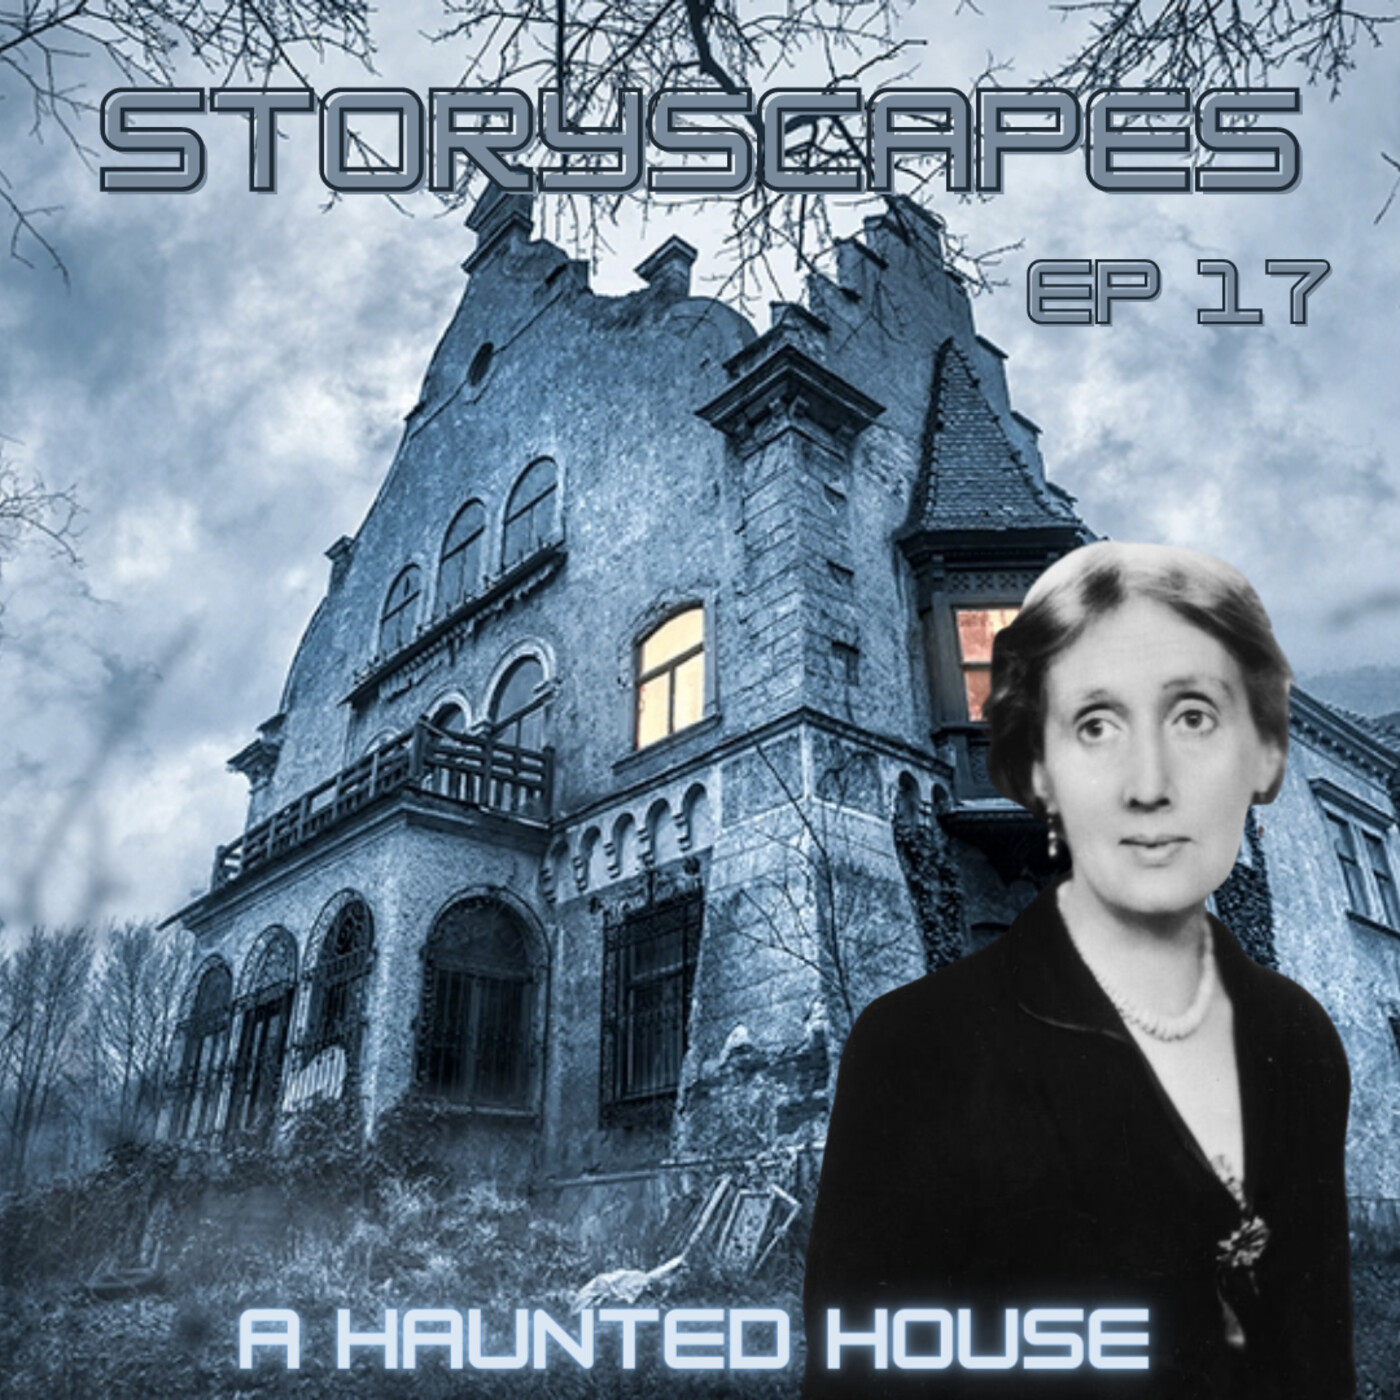 Episode 17 - A Haunted House - by Virginia Woolf - STORYSCAPES